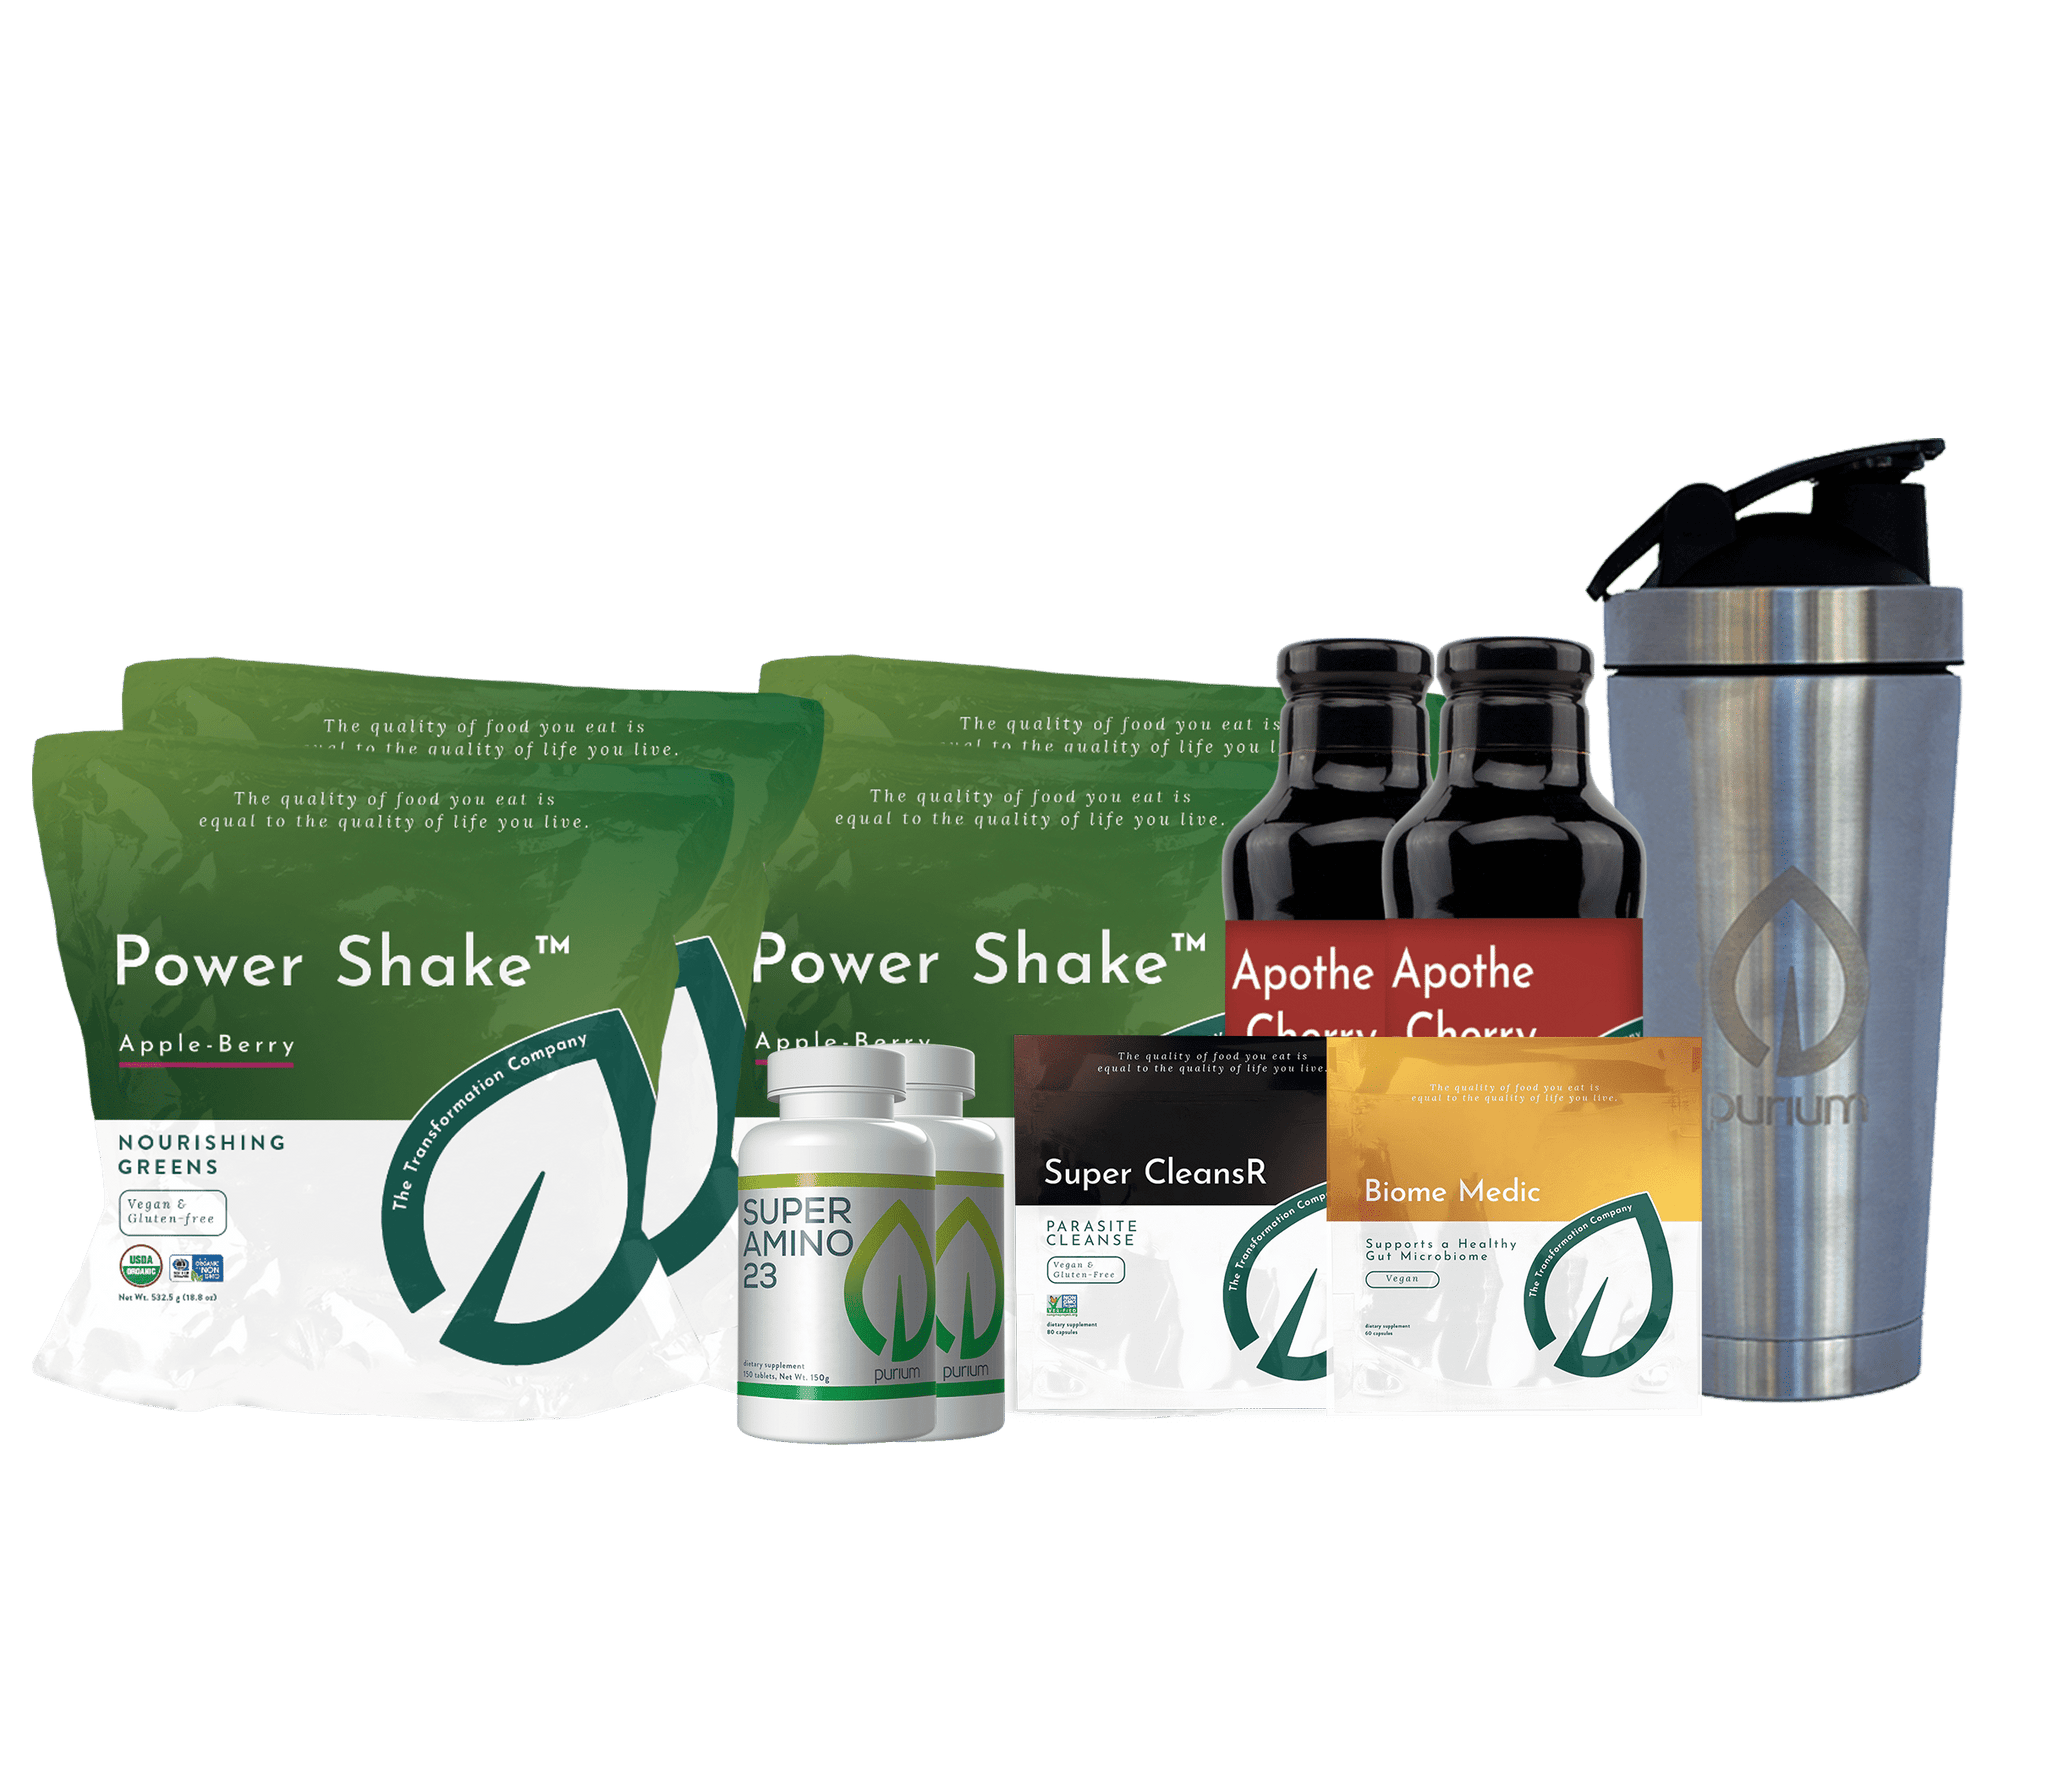 Purium Ultimate Lifestyle Transformation Basic (Biome Medic, Super Amino 23, Super Cleansr, and Stainless Steel Waterbottle) Package (30 Day Program)